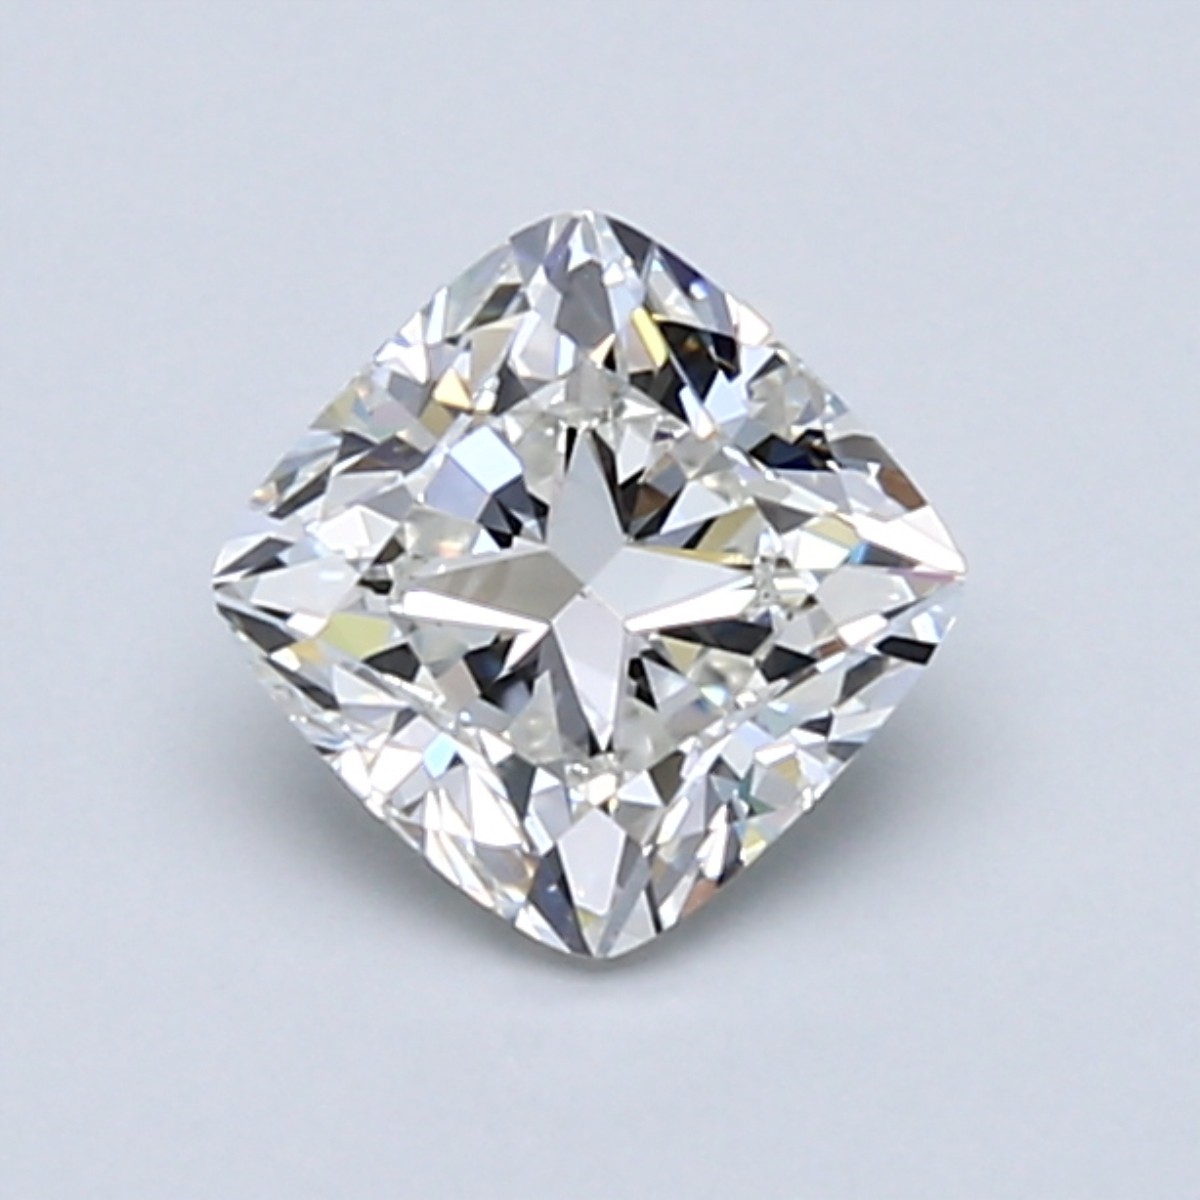 Cushion 1.0 Carat H Color VS1 Clarity For Sale